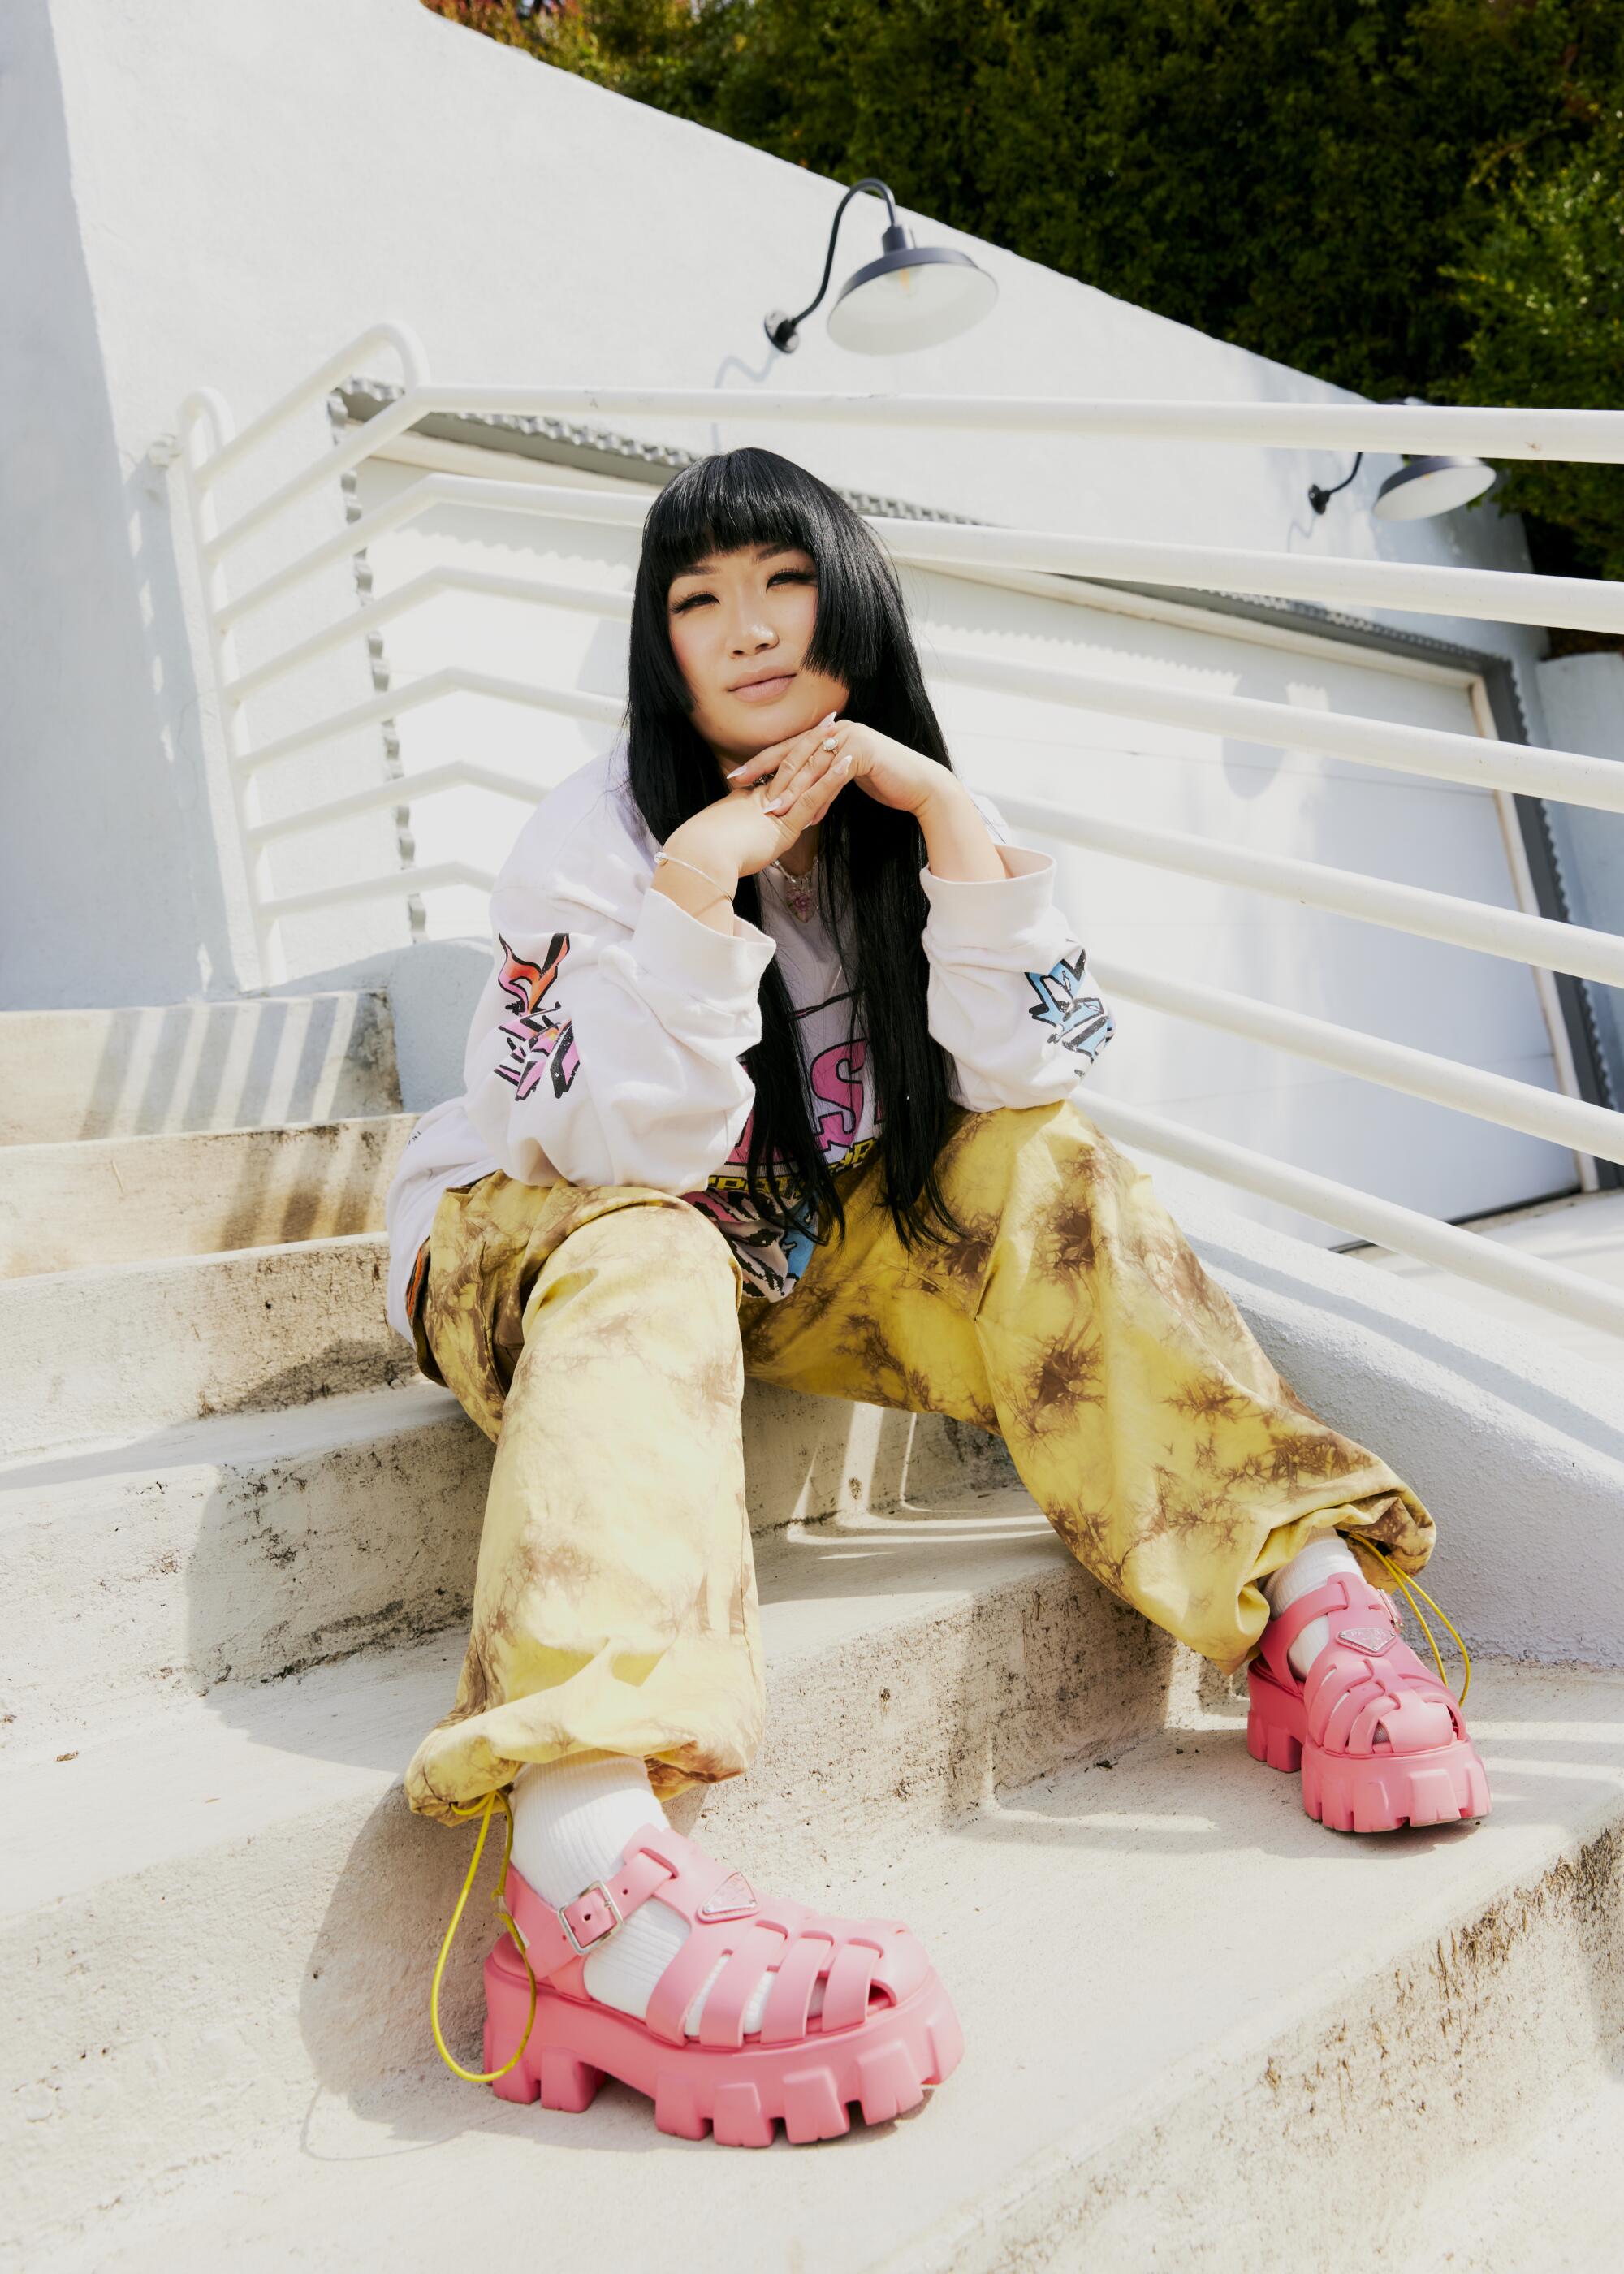 Stylist Jess Mori sitting on outdoor steps, wearing pink shoes.